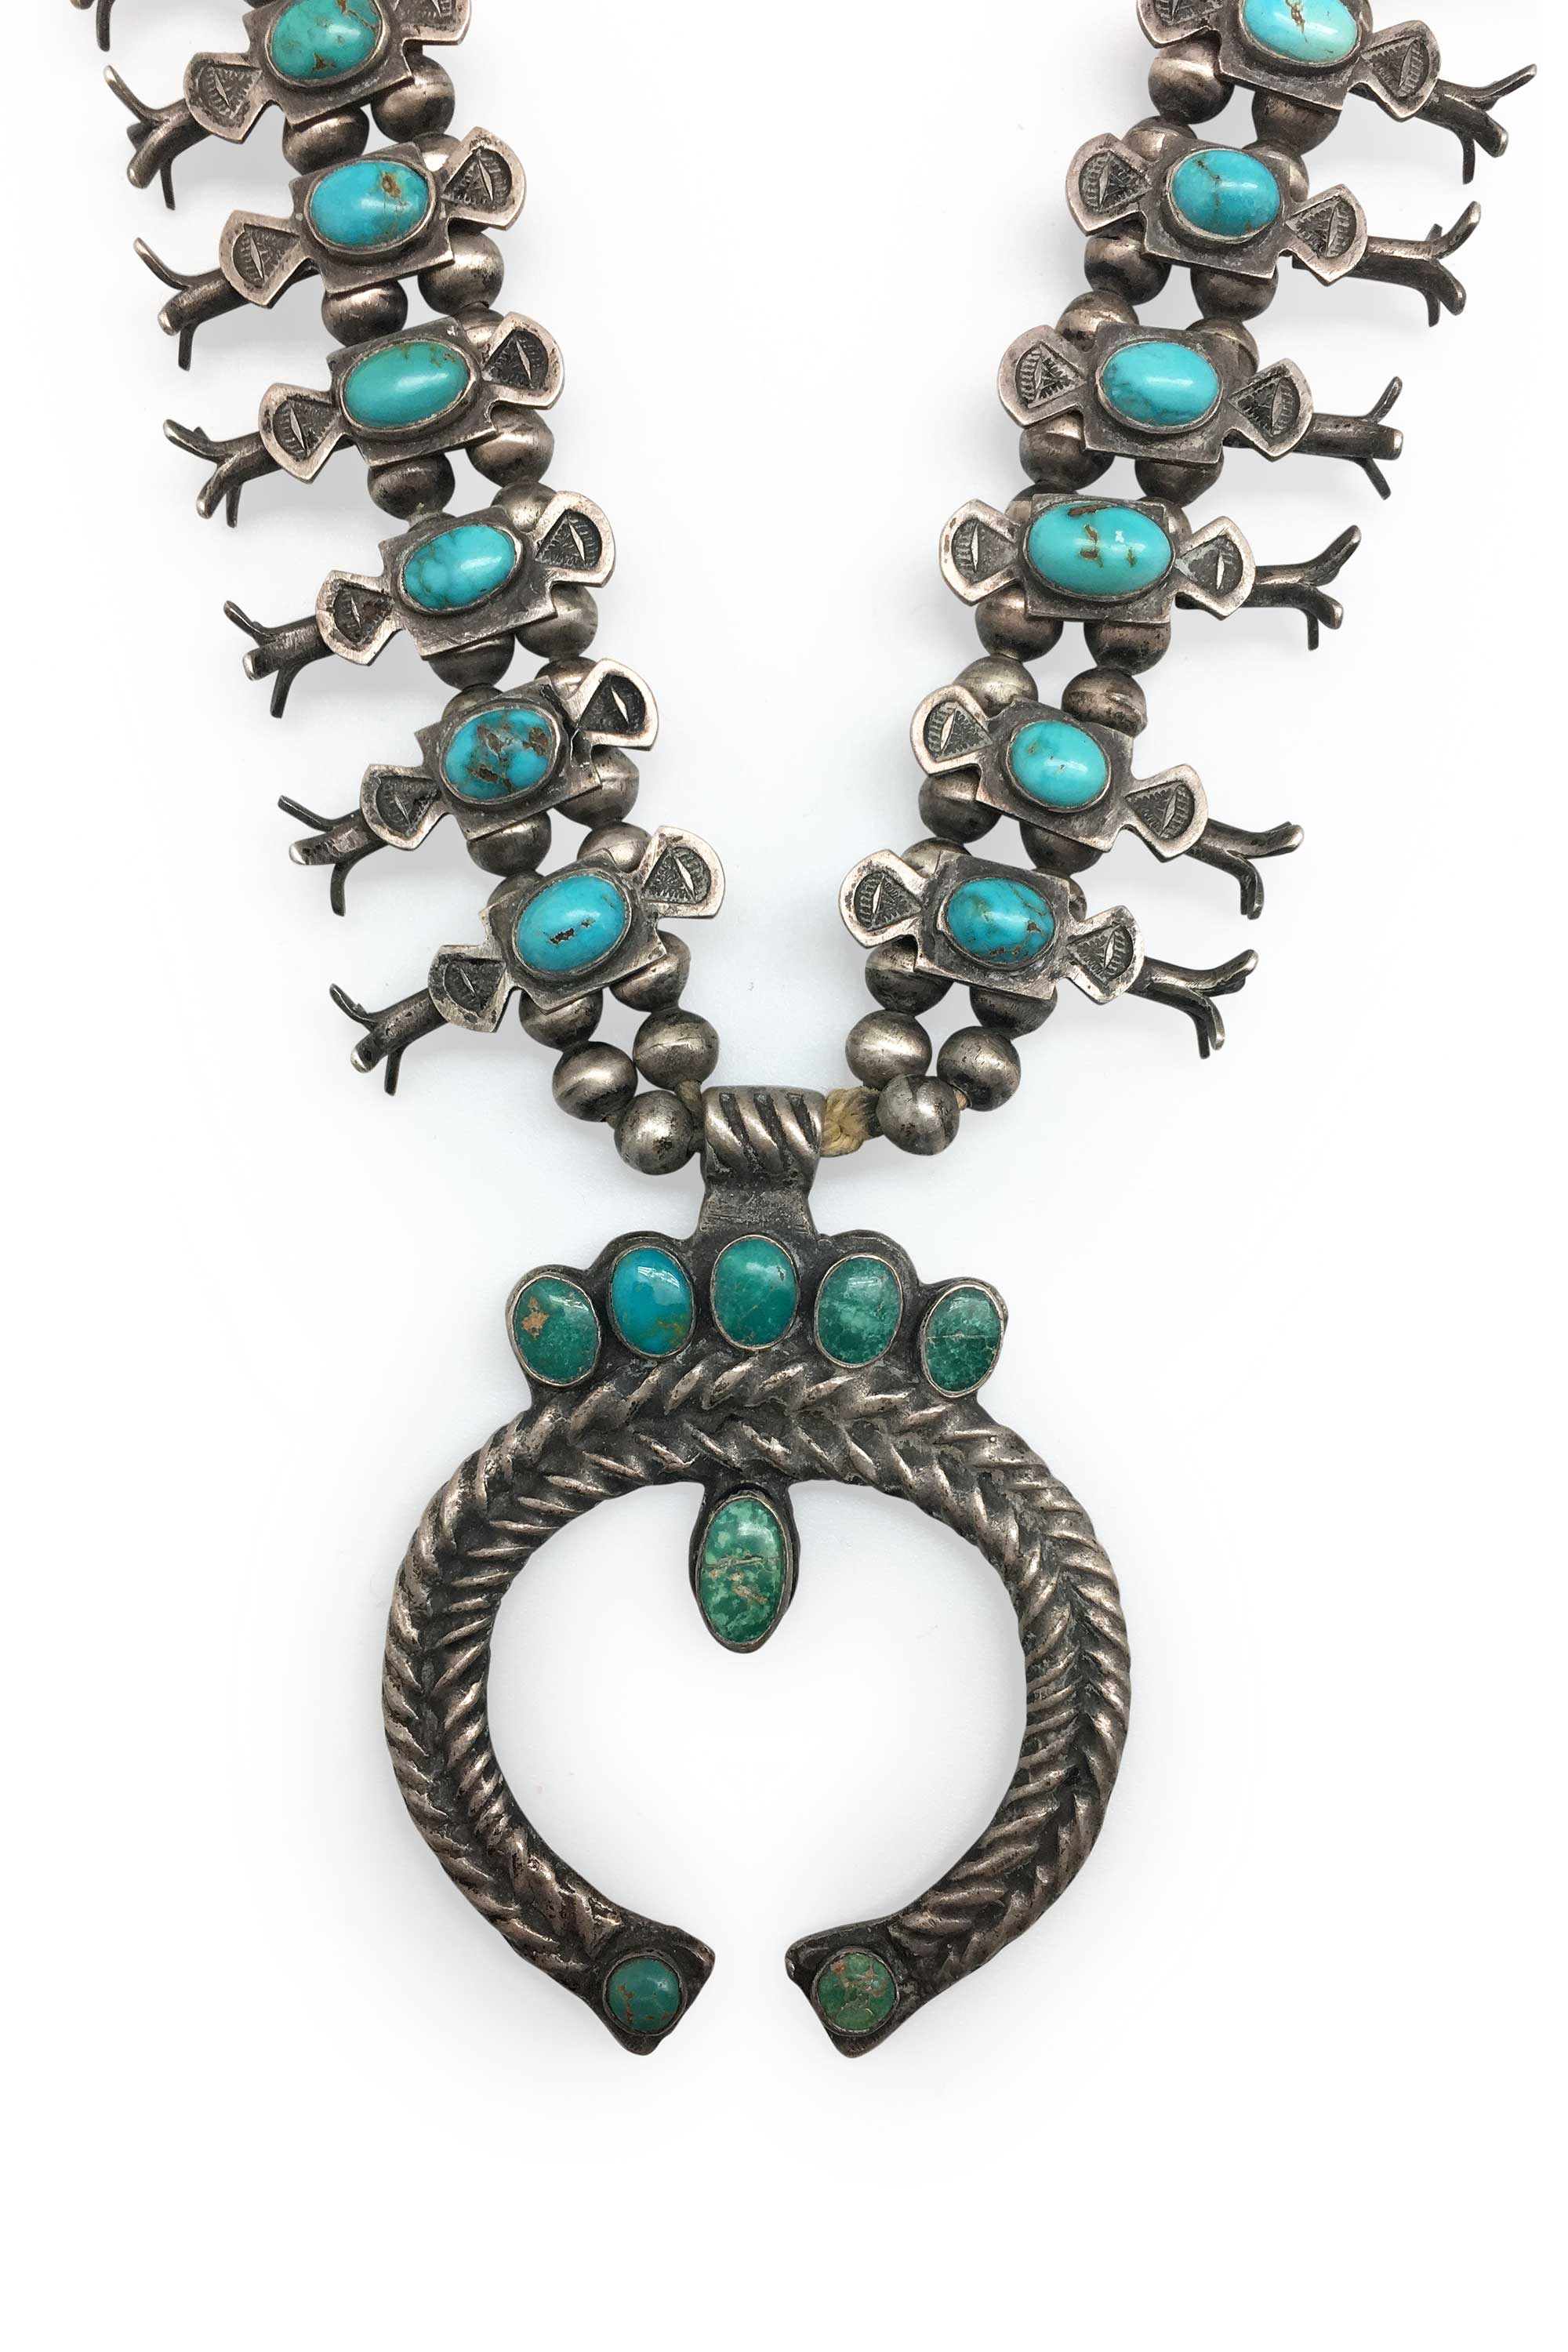 Traditional Navajo Squash Blossom Necklace with Genuine Hachita Turquoise